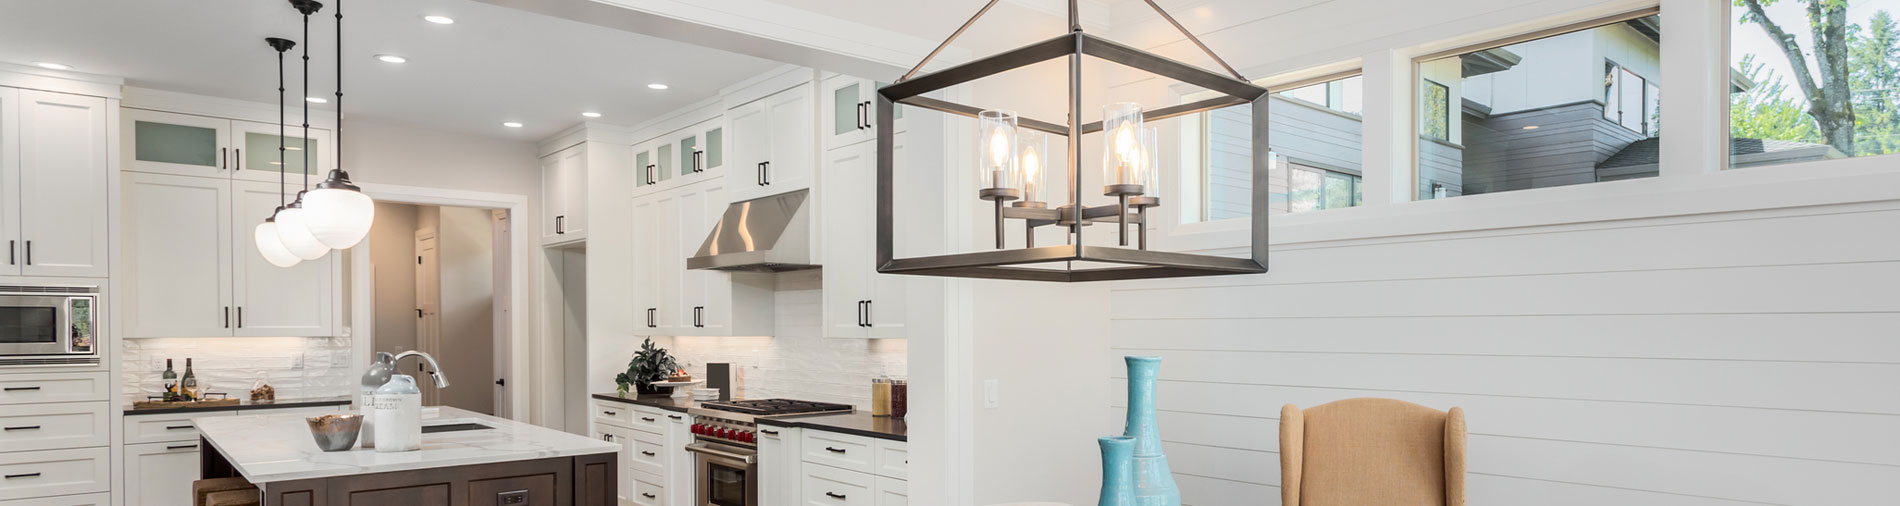 Interior kitchen lighting installation - Qualicum Beach, Parksville, Nanaimo electrical company, Collins Electric